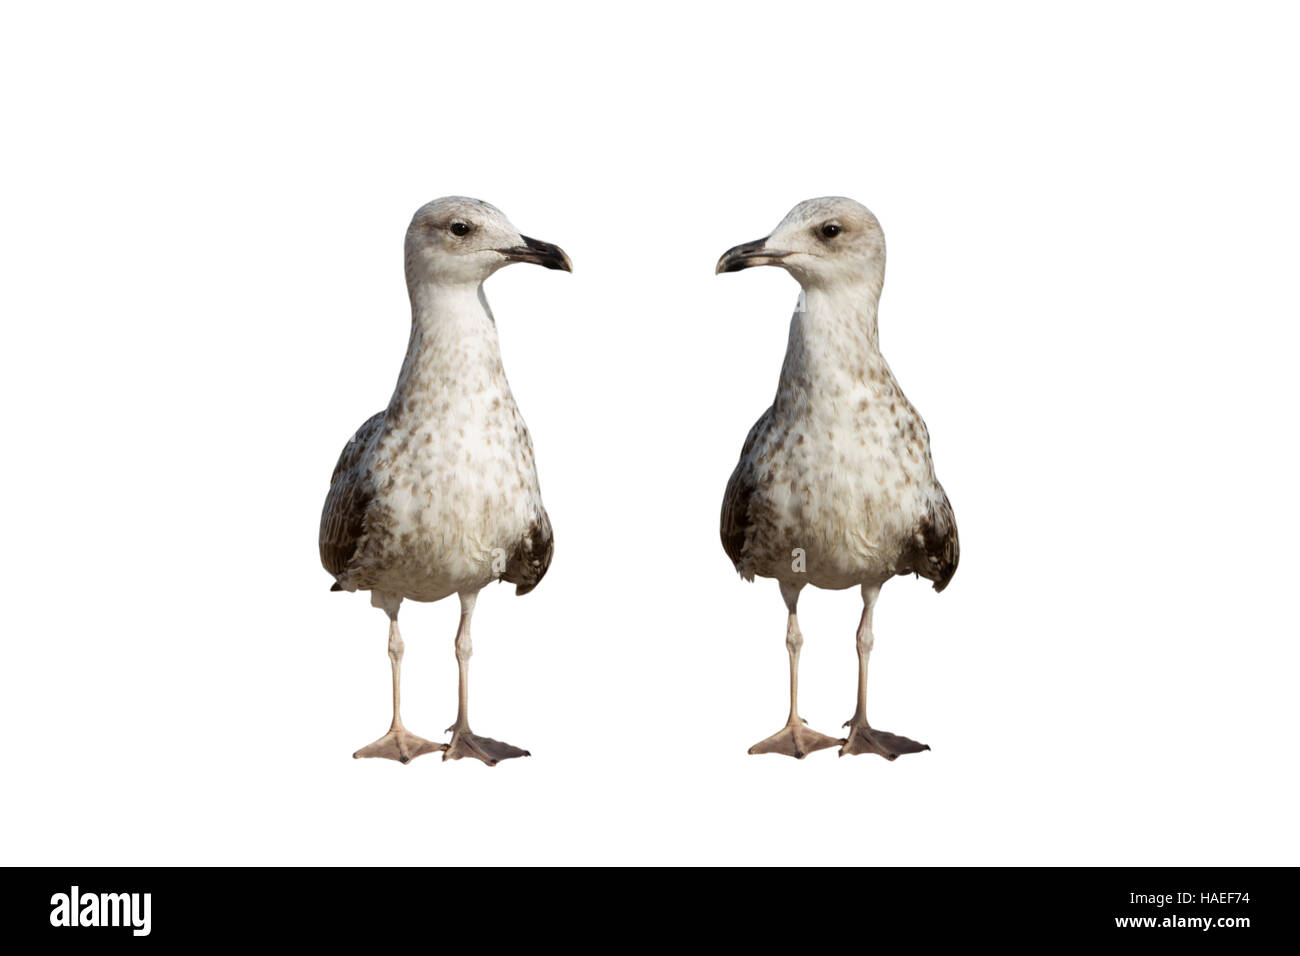 Two seagulls looking at each other on the white background Stock Photo